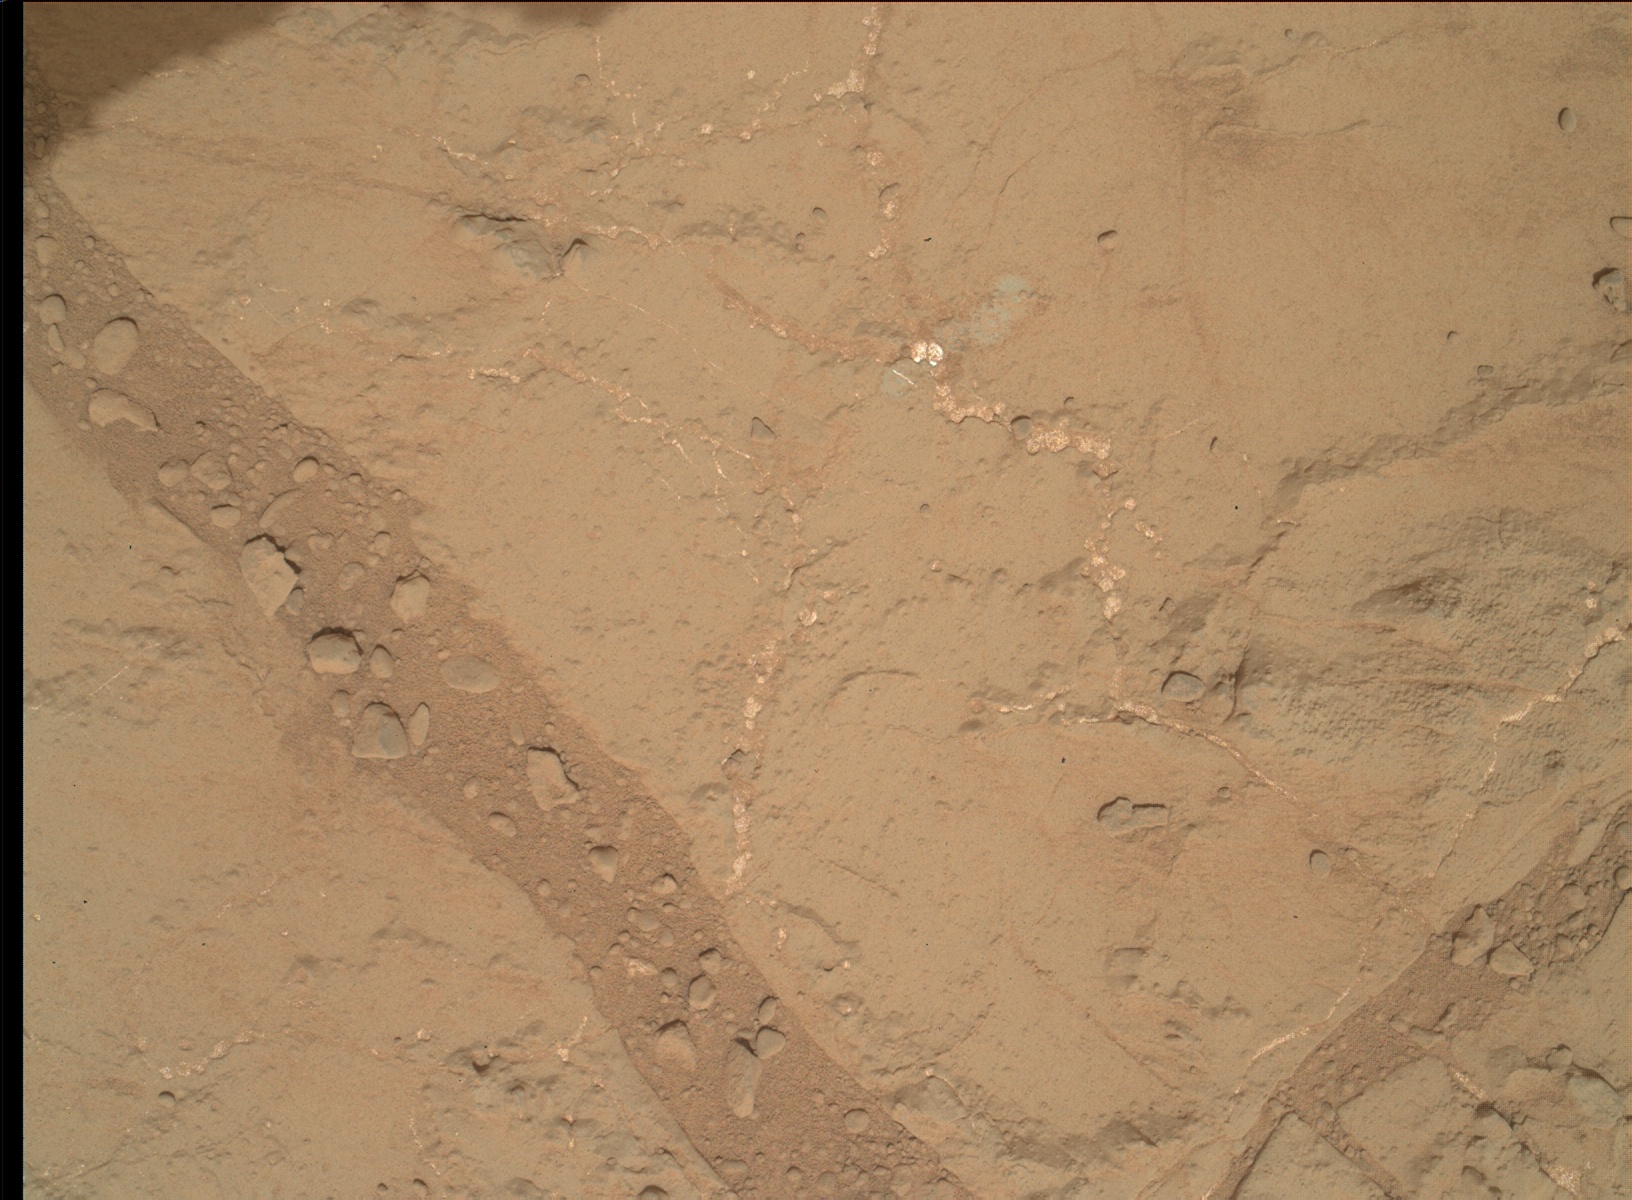 Nasa's Mars rover Curiosity acquired this image using its Mars Hand Lens Imager (MAHLI) on Sol 168